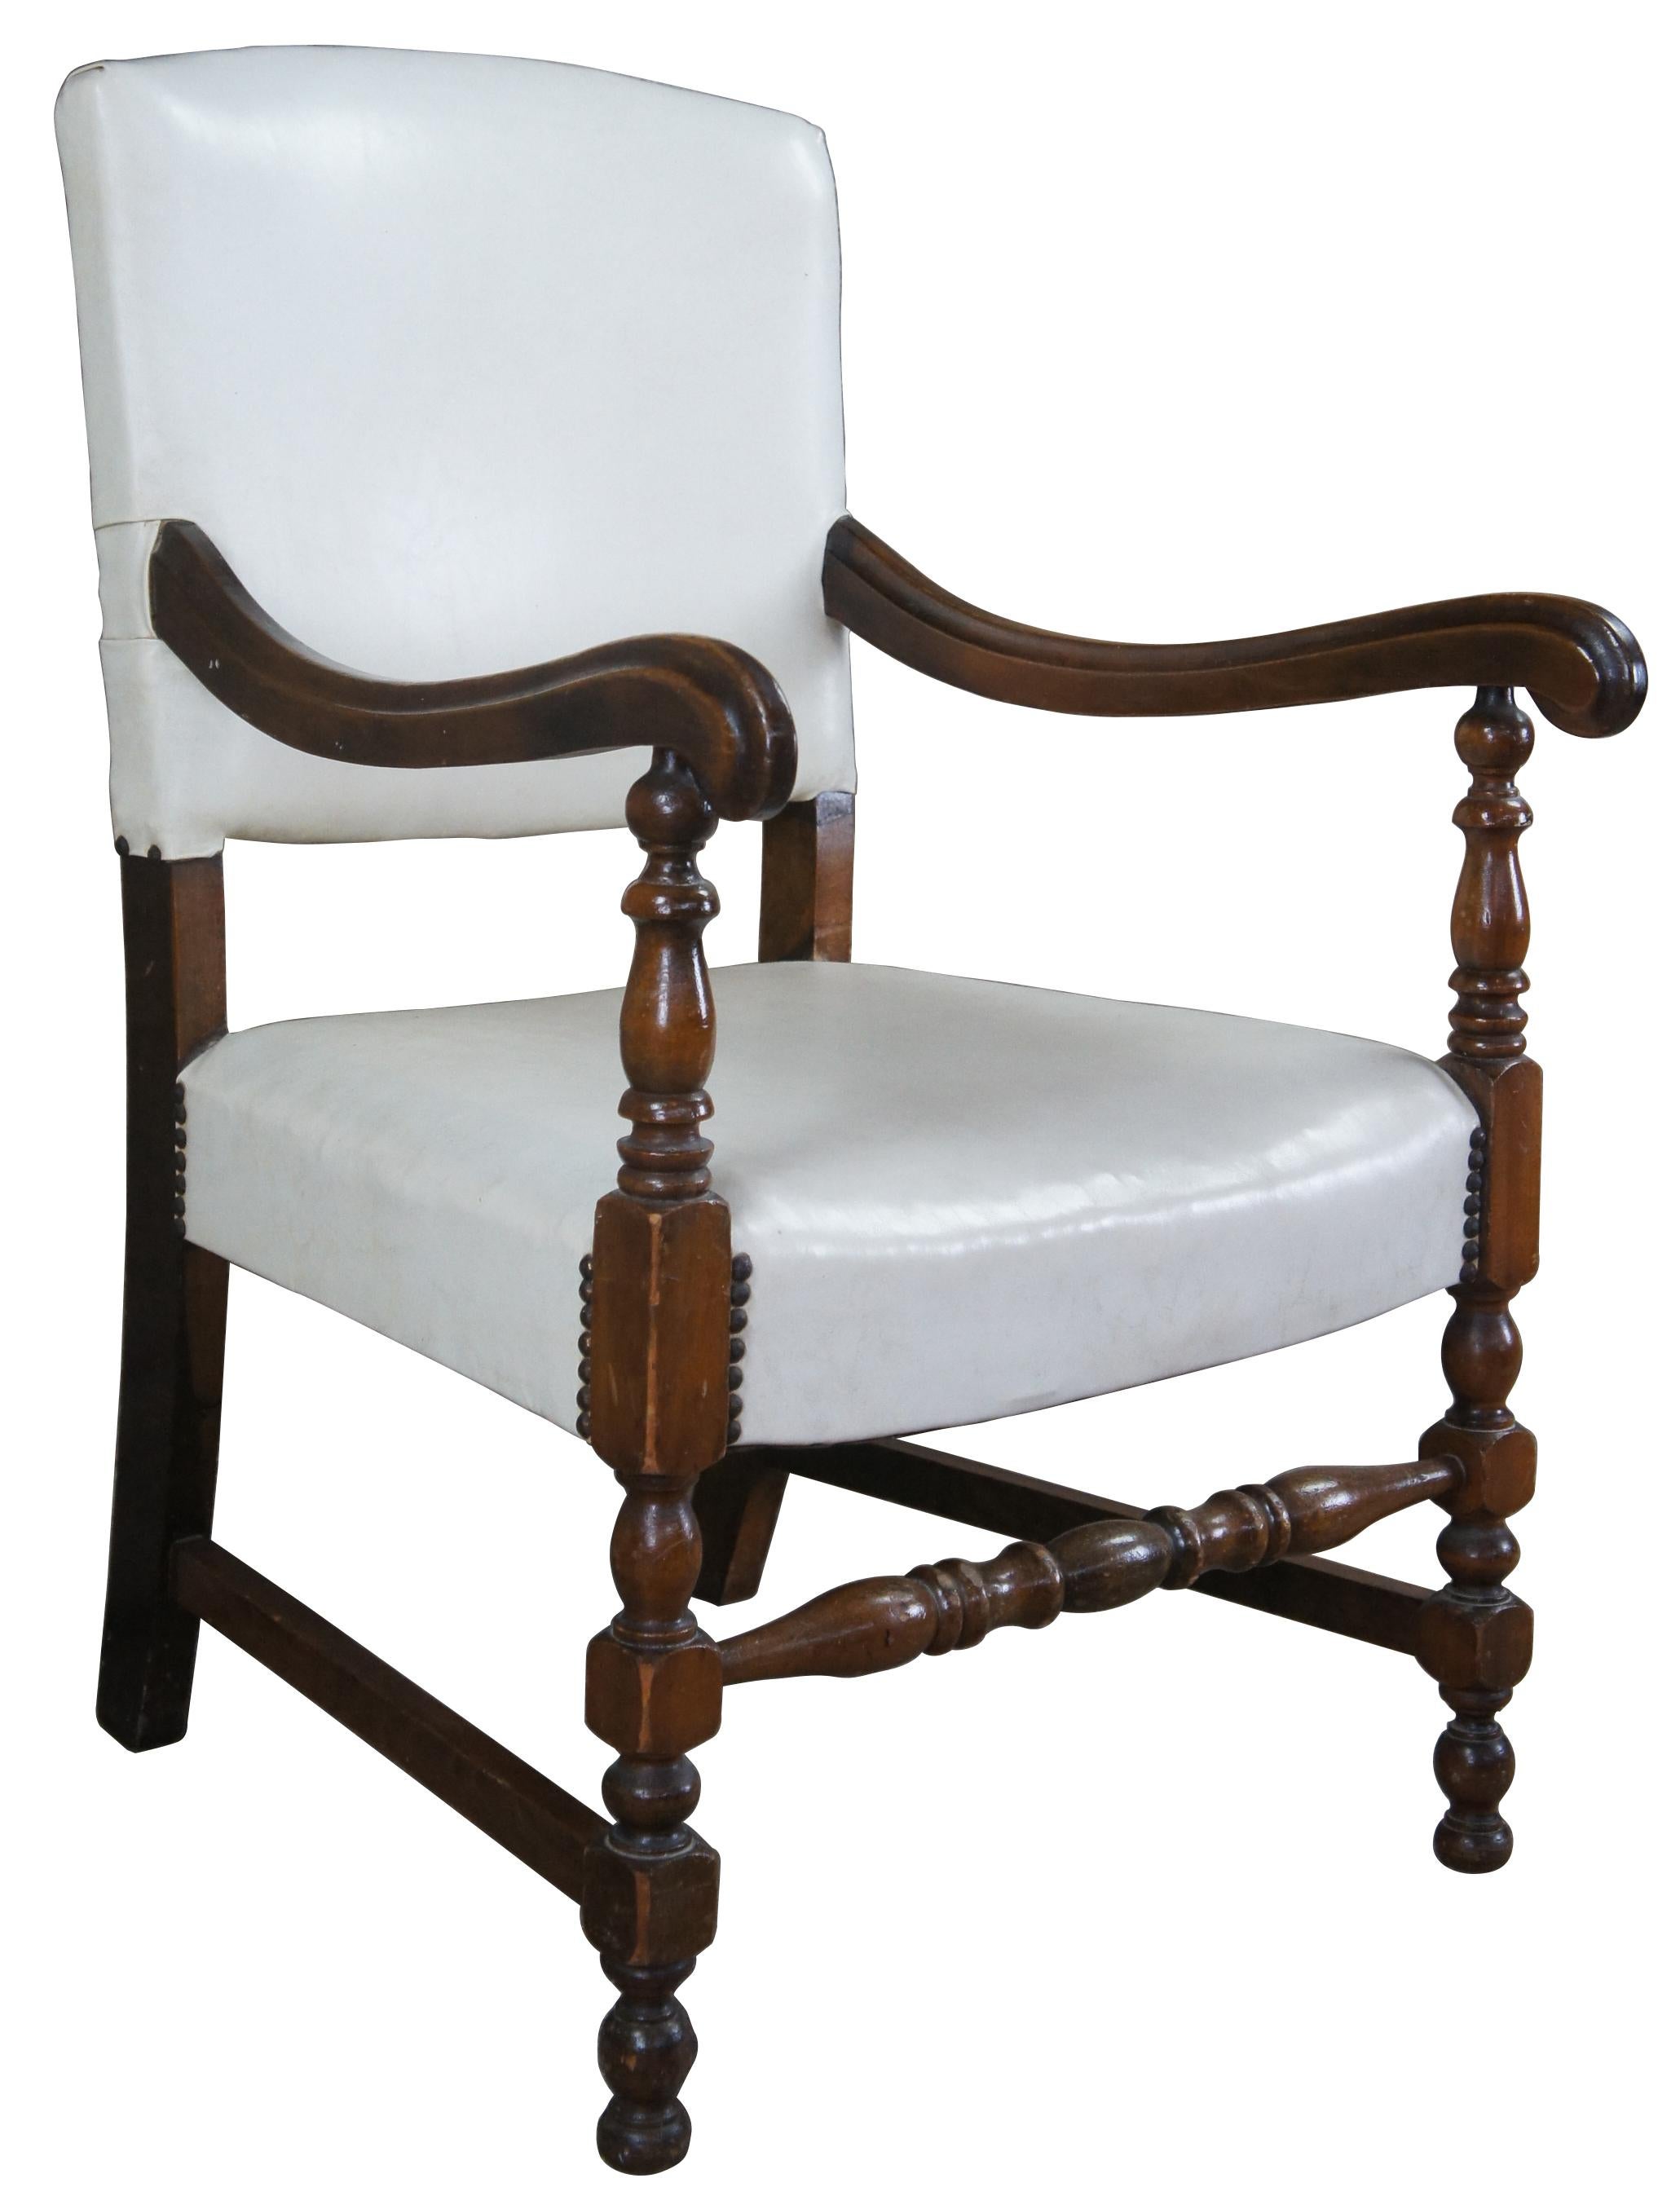 Early 20th century William and Mary arm chair. Made of mahogany featuring scrolled arms and white leather with nailhead trim.